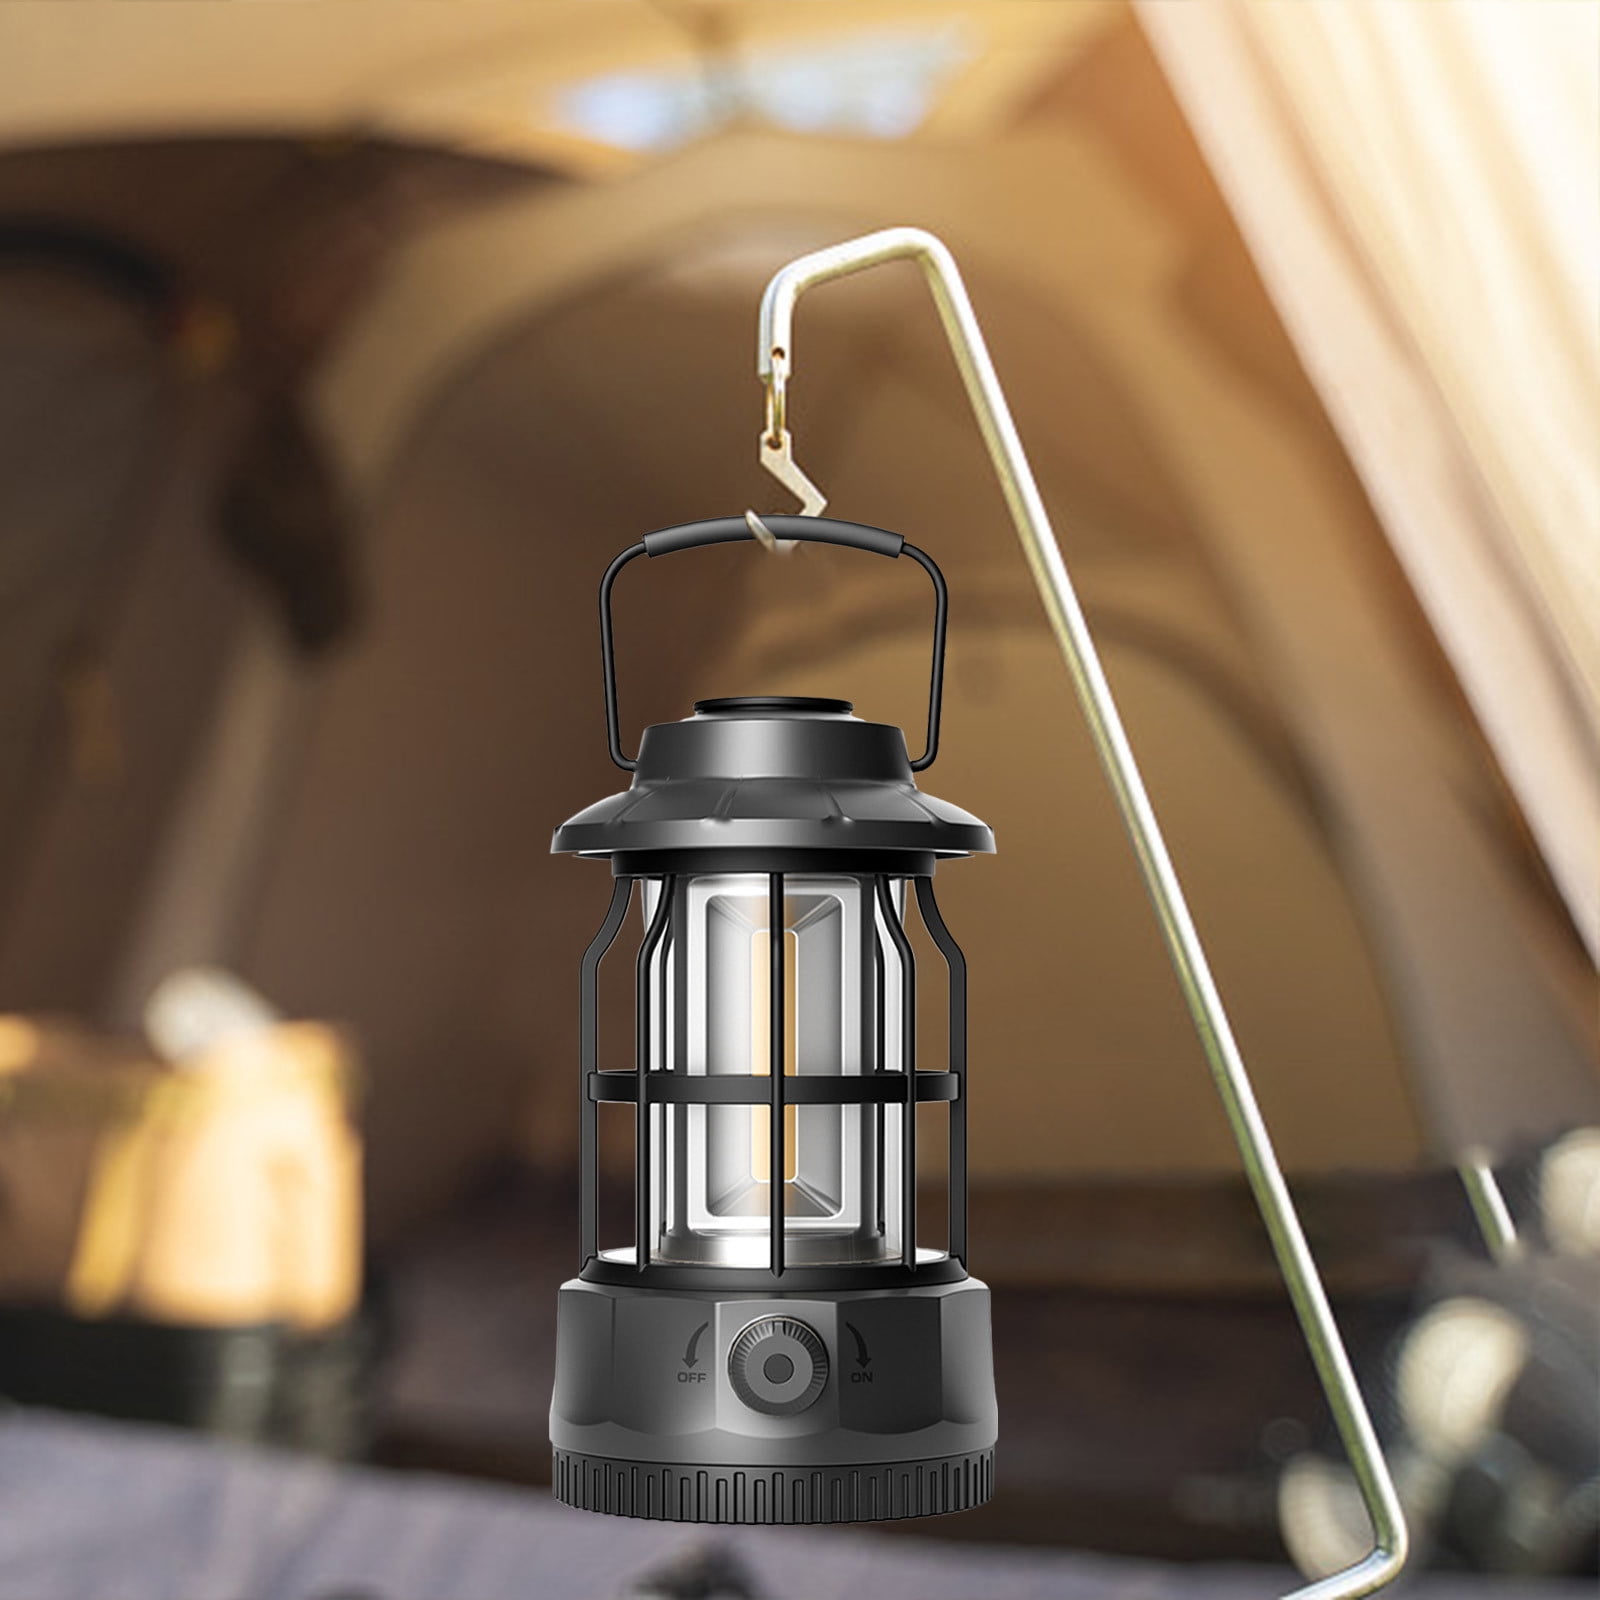 Sdjma LED Vintage Horse Lantern, Battery Powered Camping Lantern, Dimmable Tabletop Lantern Decor, Portable Outdoor Hanging Tent Light for Camping